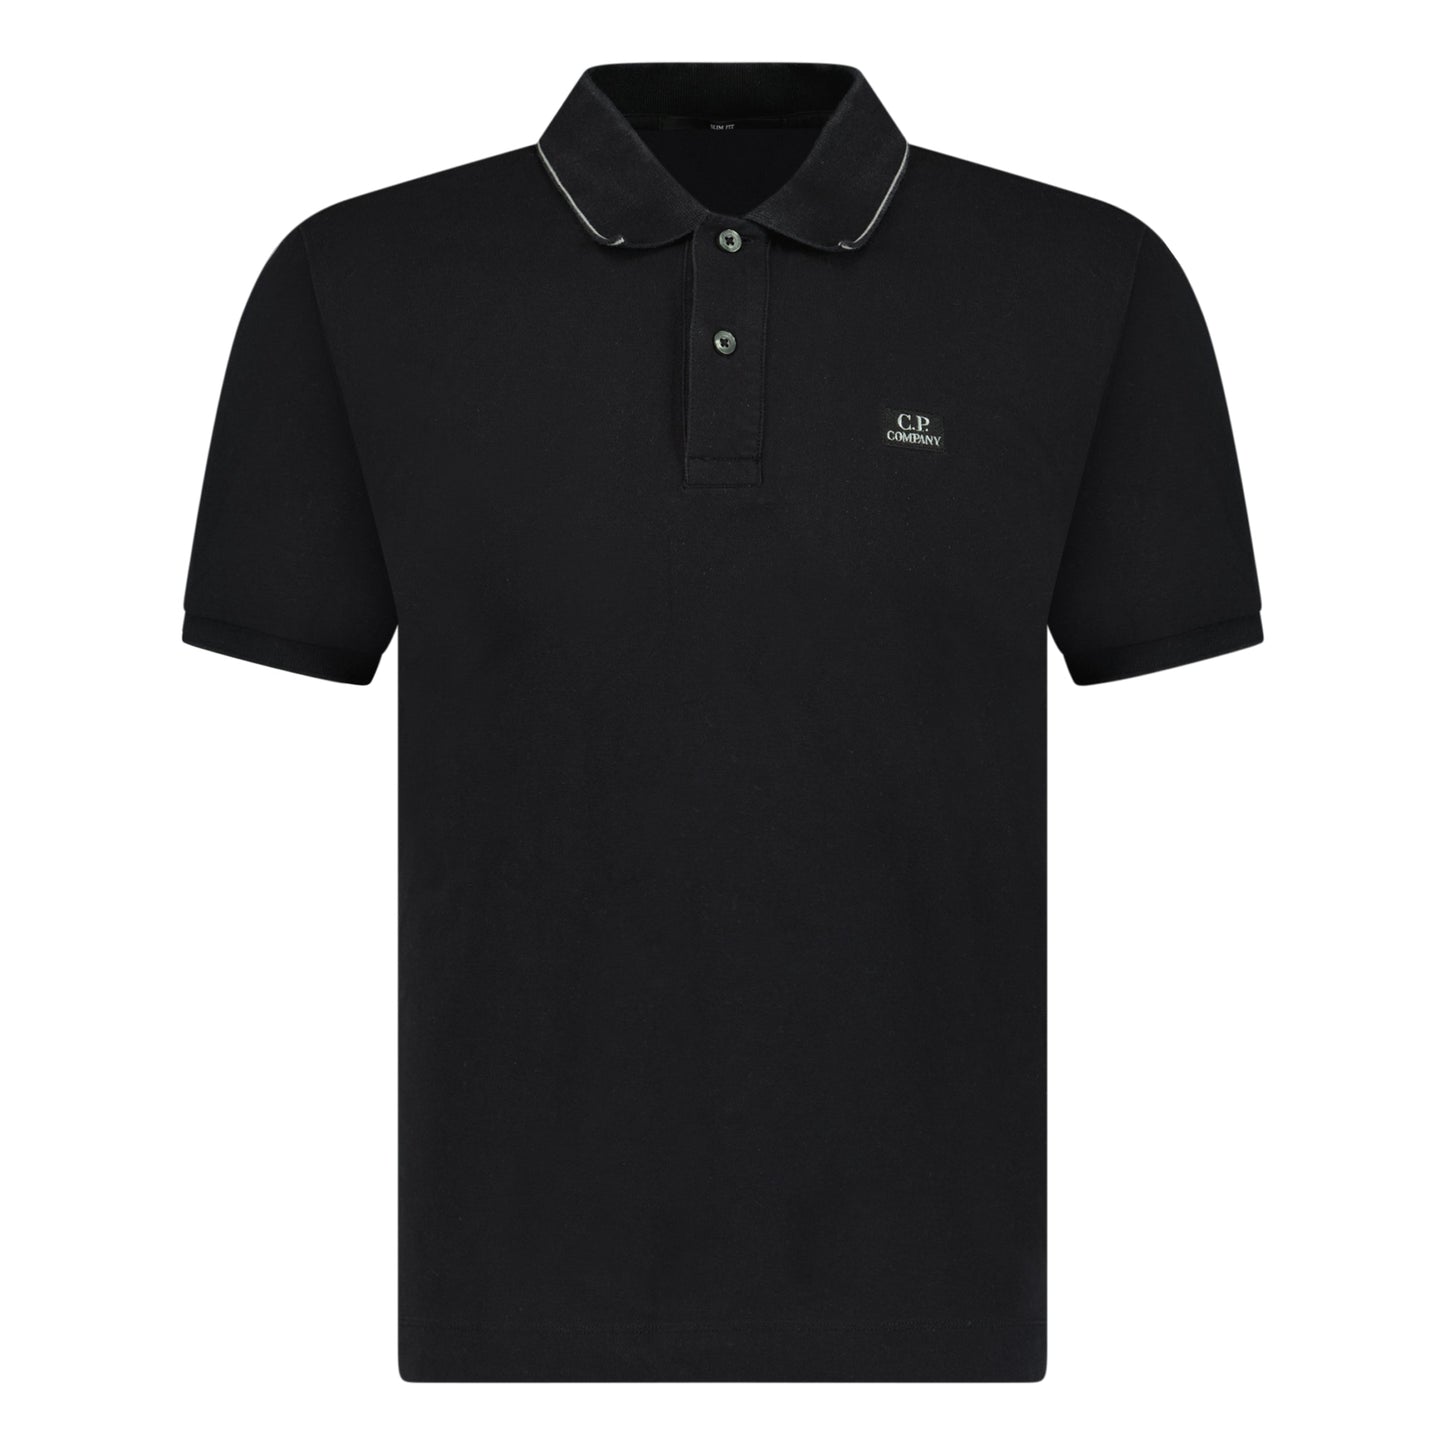 CP COMPANY POLO BLACK - MEDIUM (Fits S) - affluentarchivesUsed HIGH END DESIGNER CLOTHING